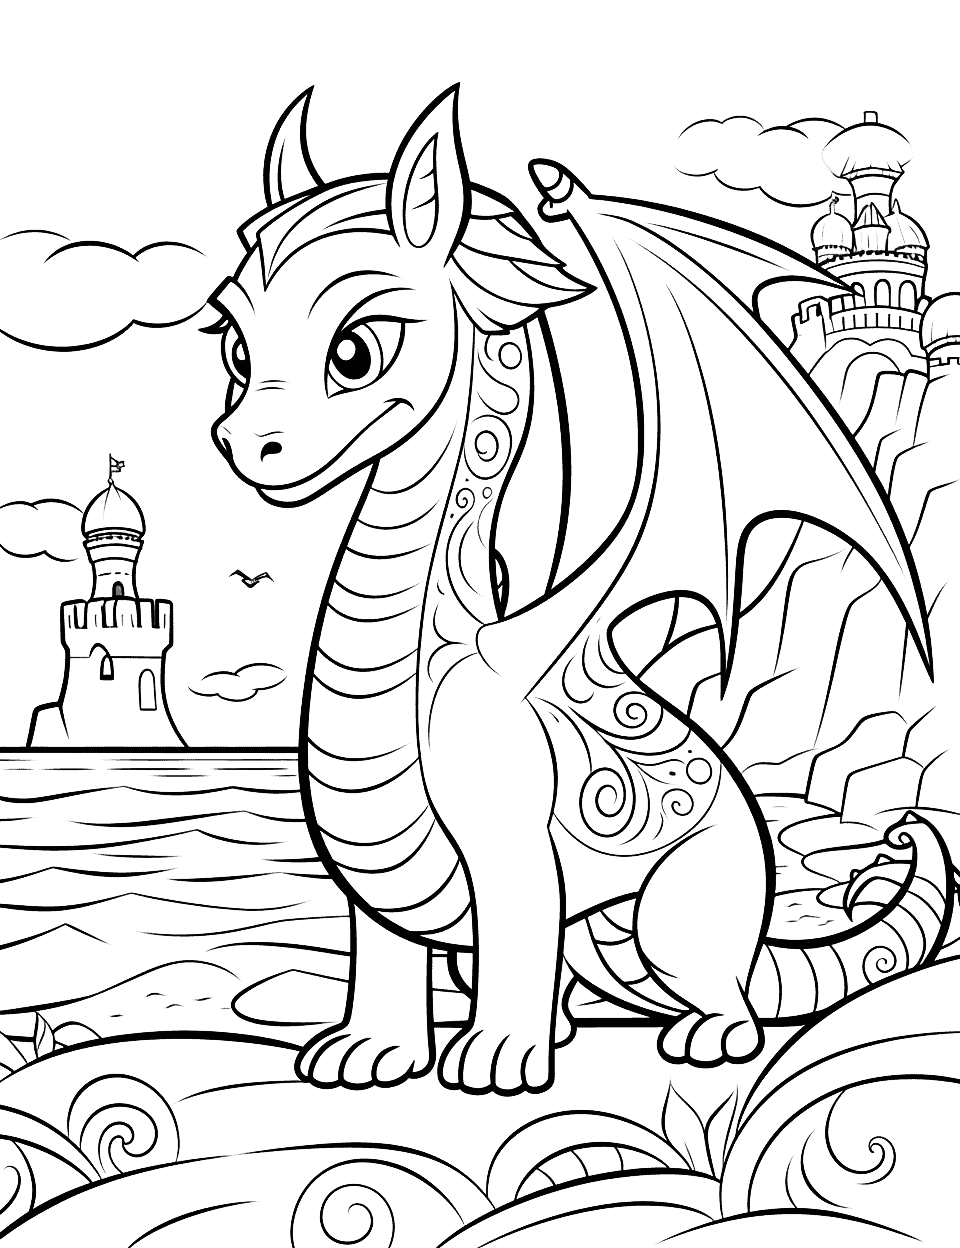 Dragon's Summer Beach Adult Coloring Page - A dragon enjoying a summer beach surrounded by intricate sandcastles.